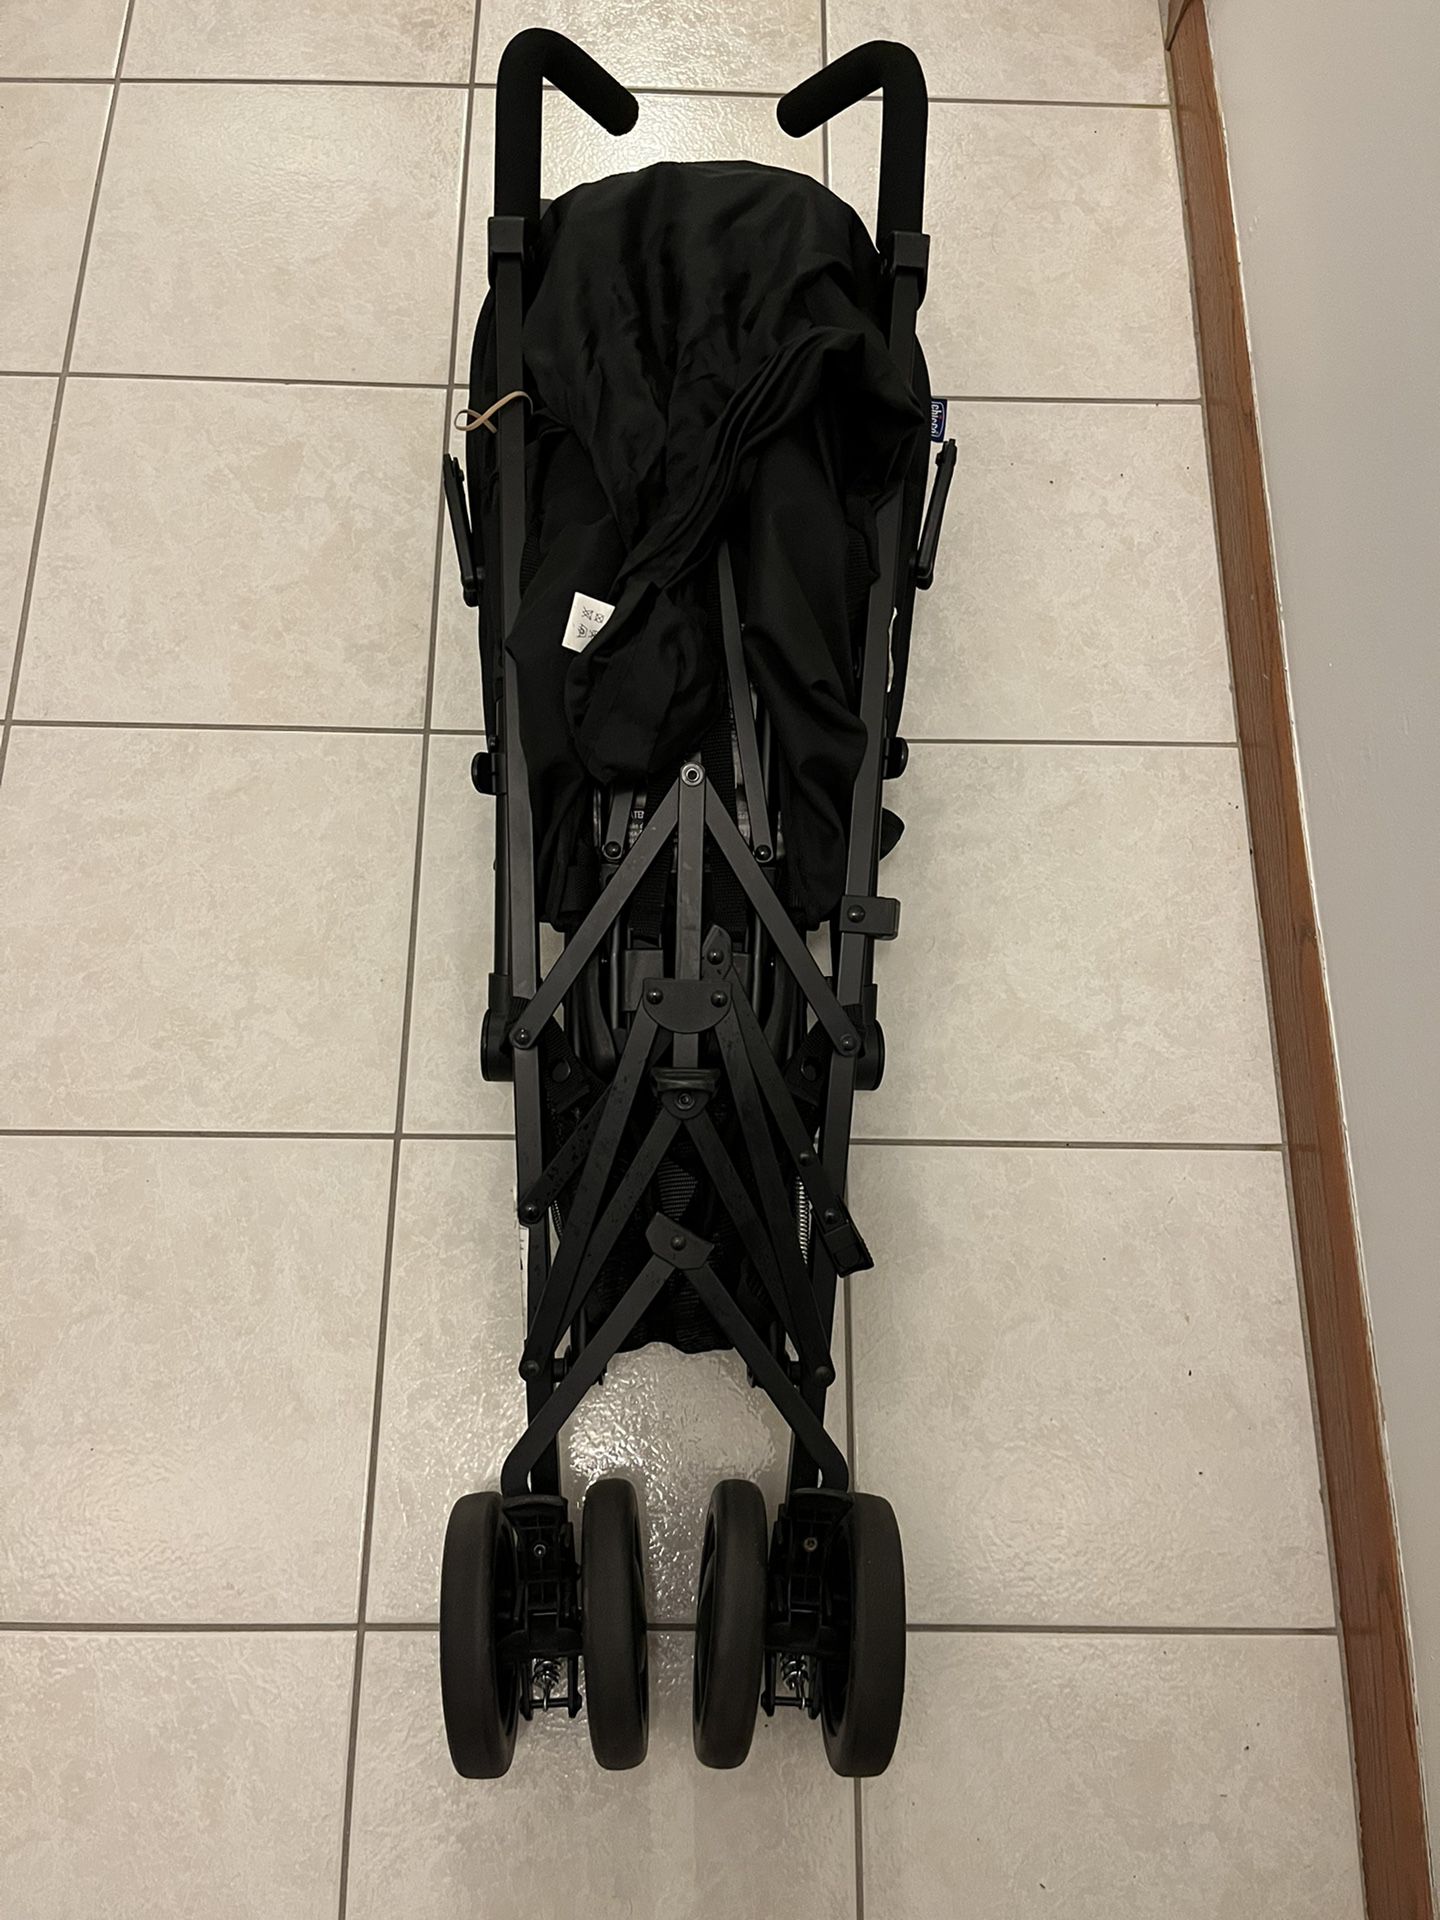 Chicco foldable stroller 